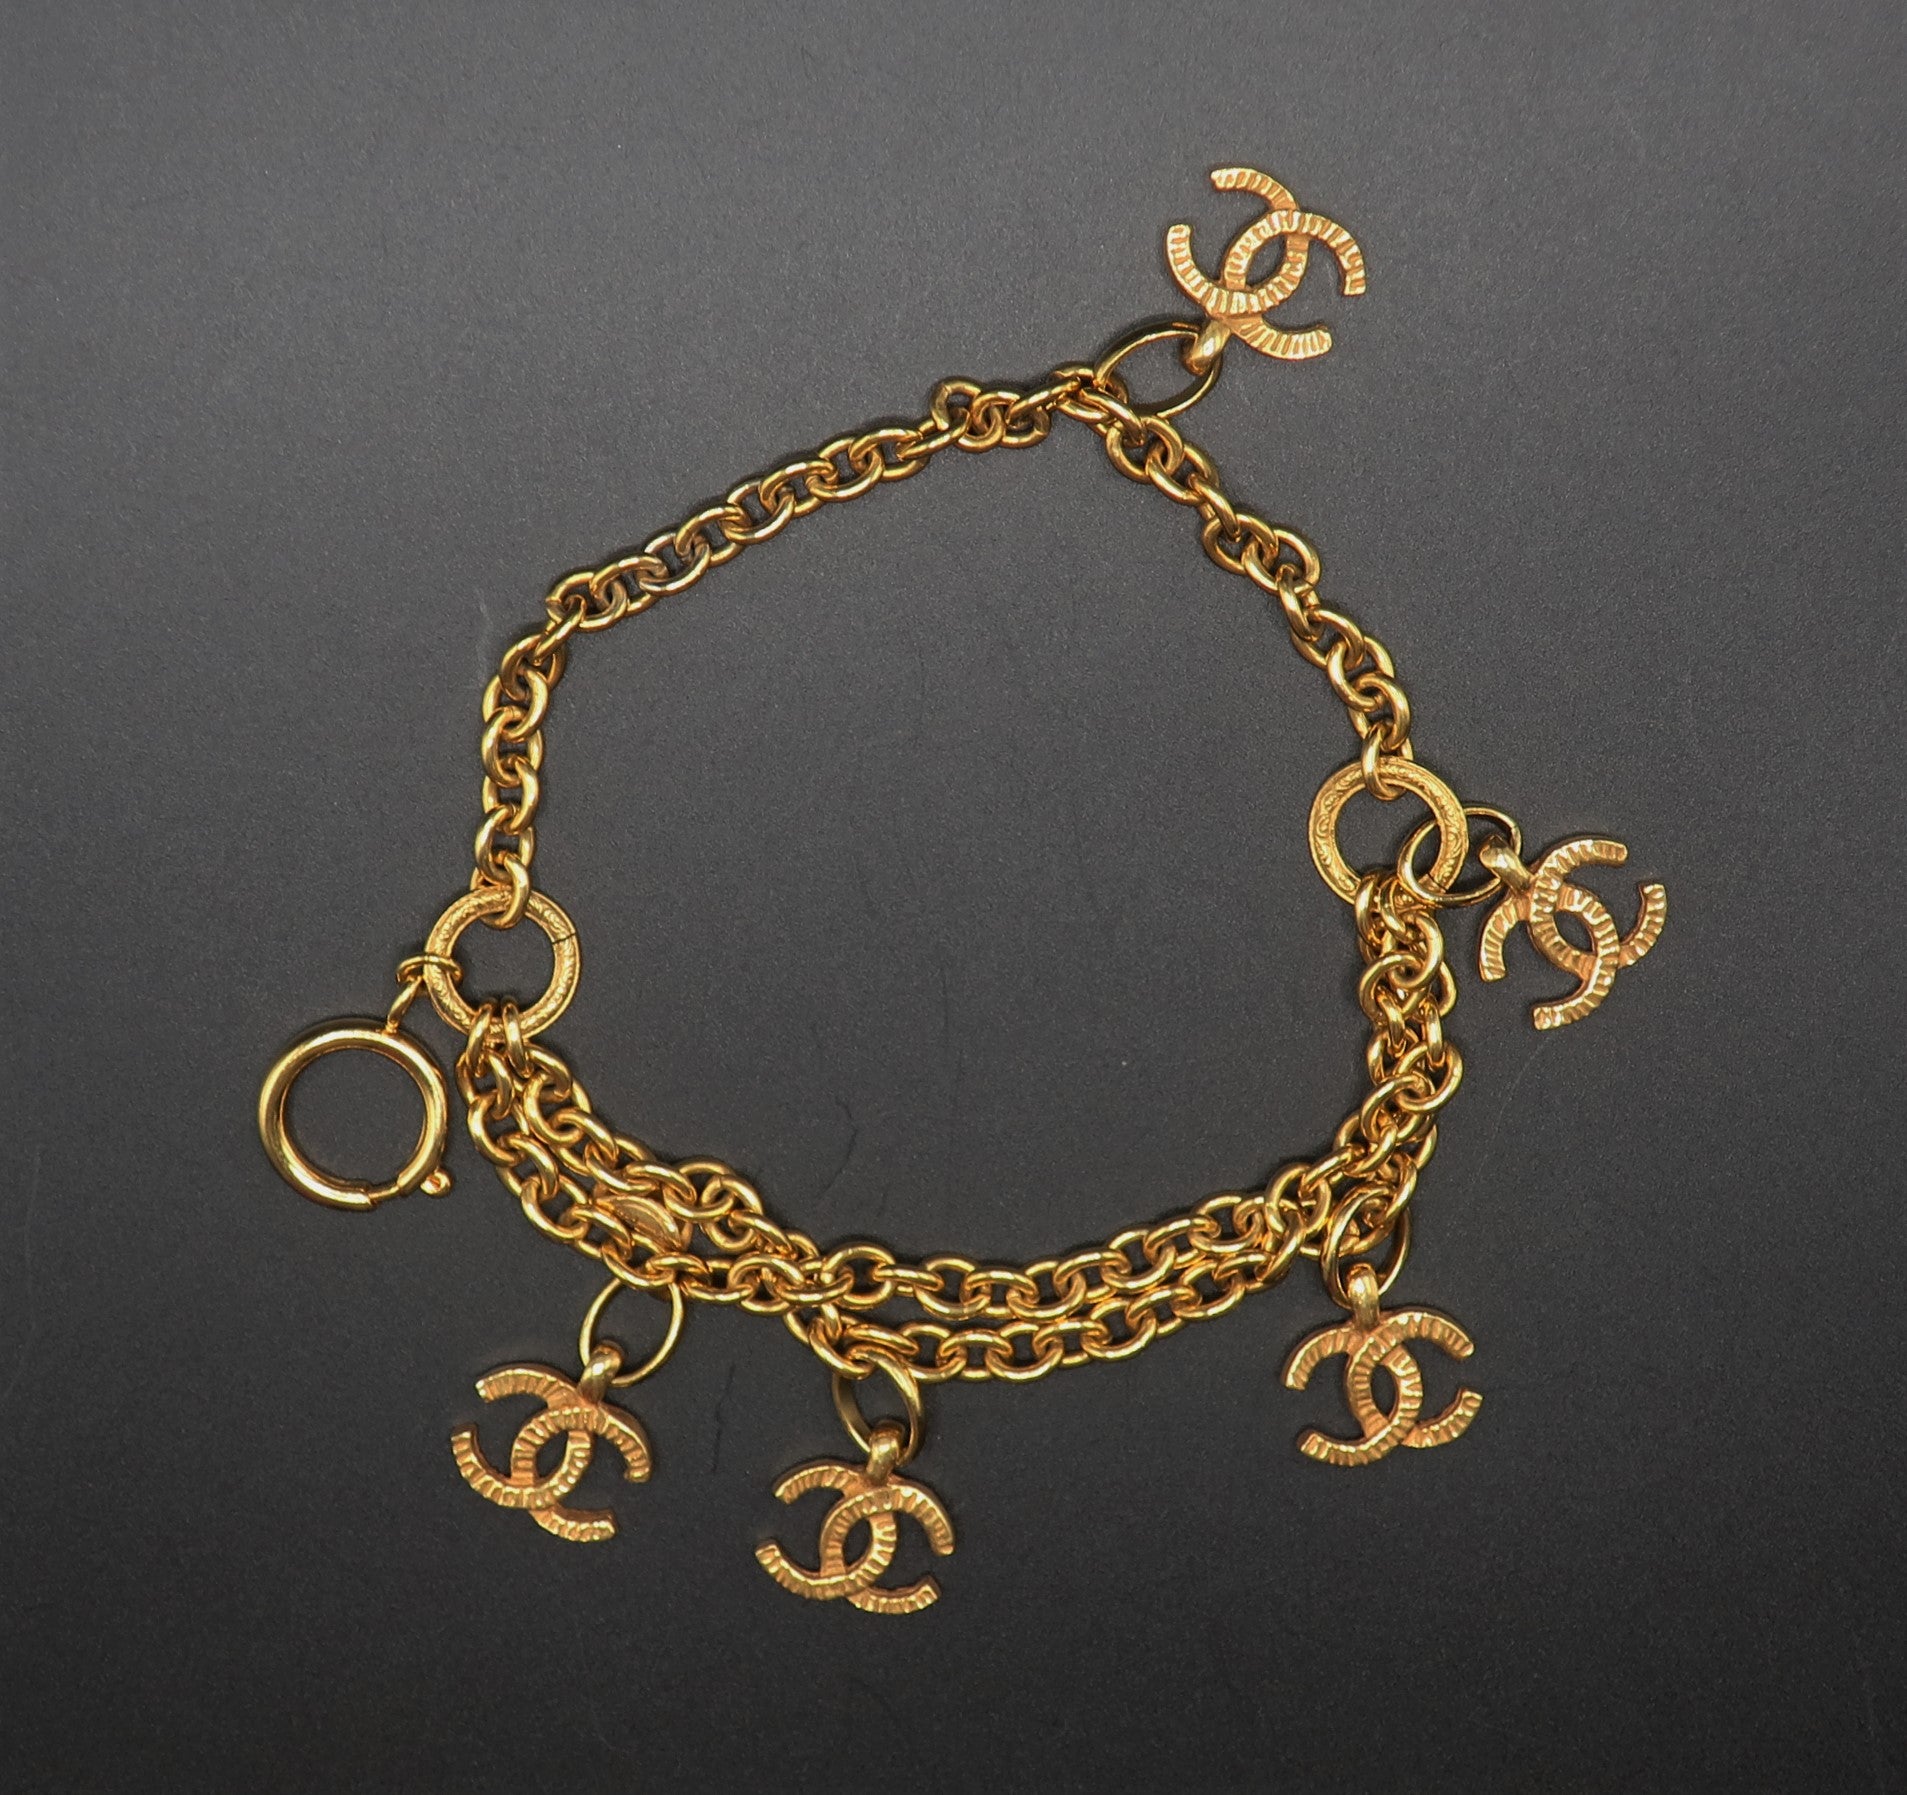 CHANEL Bracelet Vintage Gold Plated Chain Crown Motif Medal Pendant With  Box  eBay